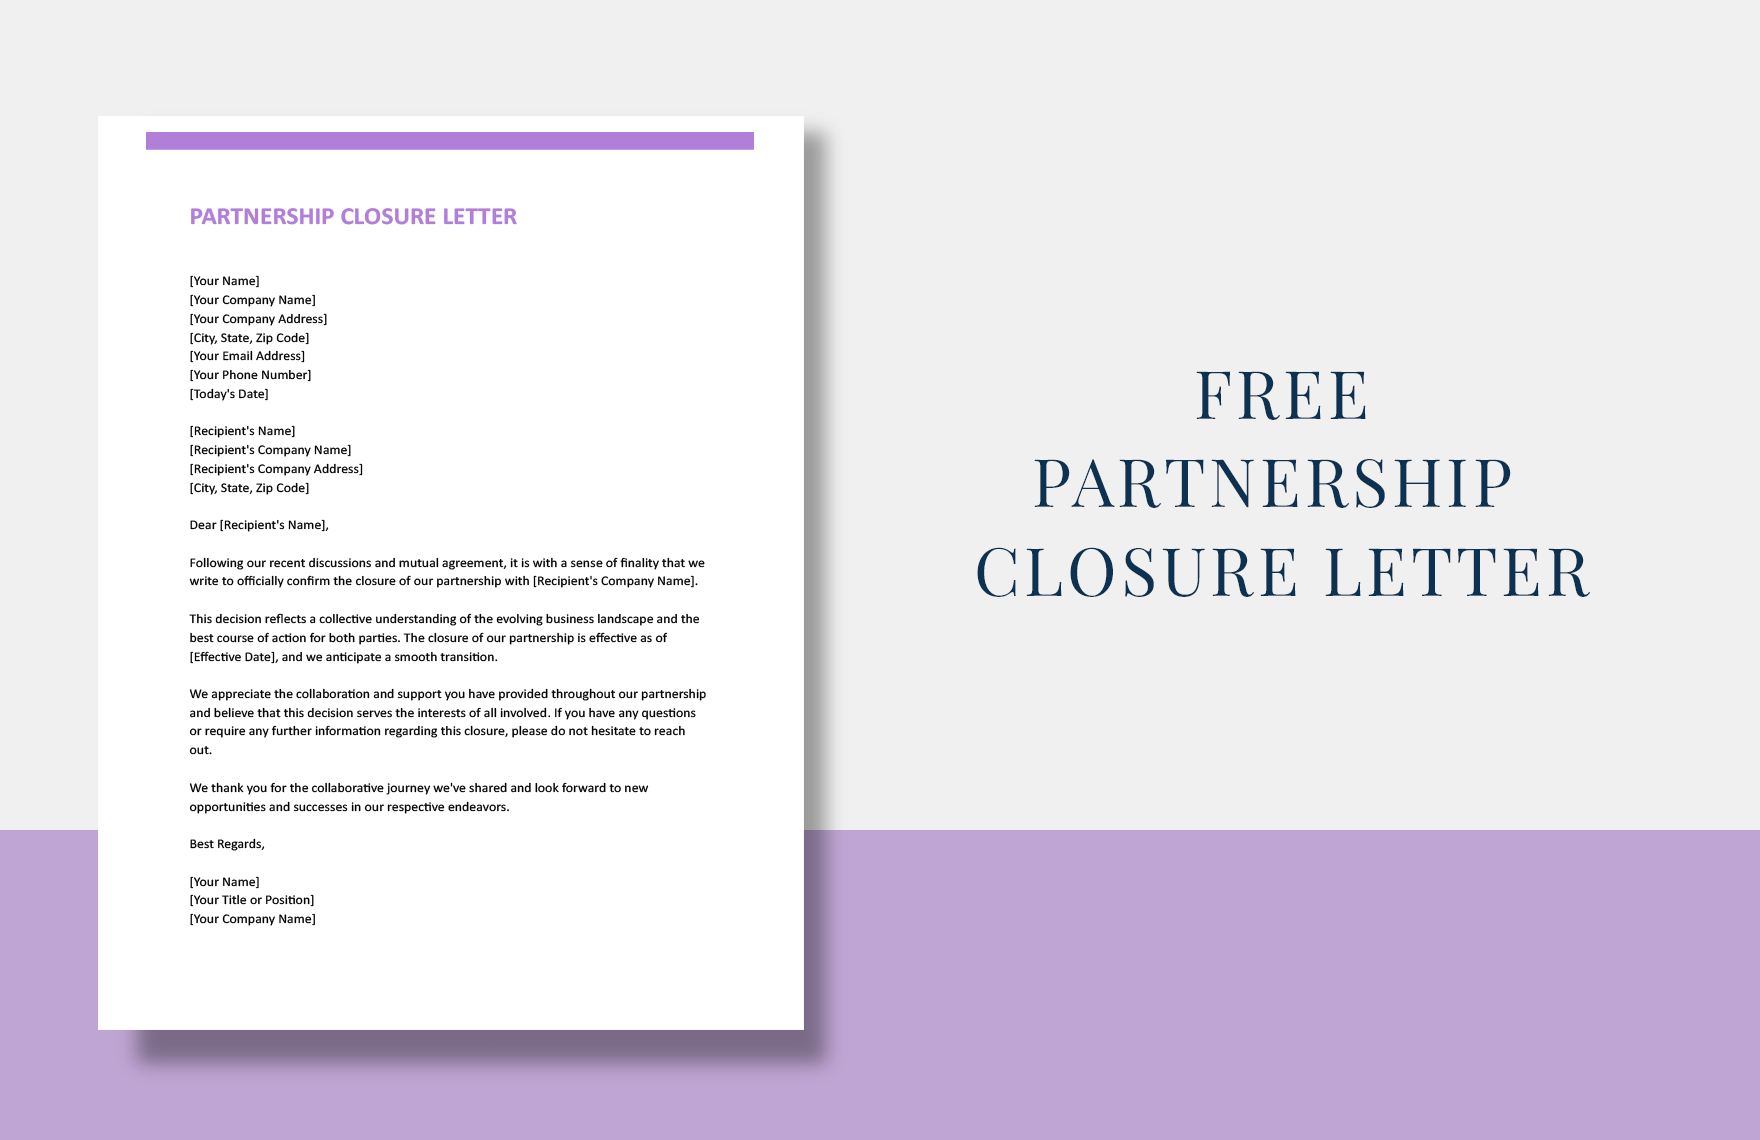 Free Partnership Closure Letter in Word, Google Docs